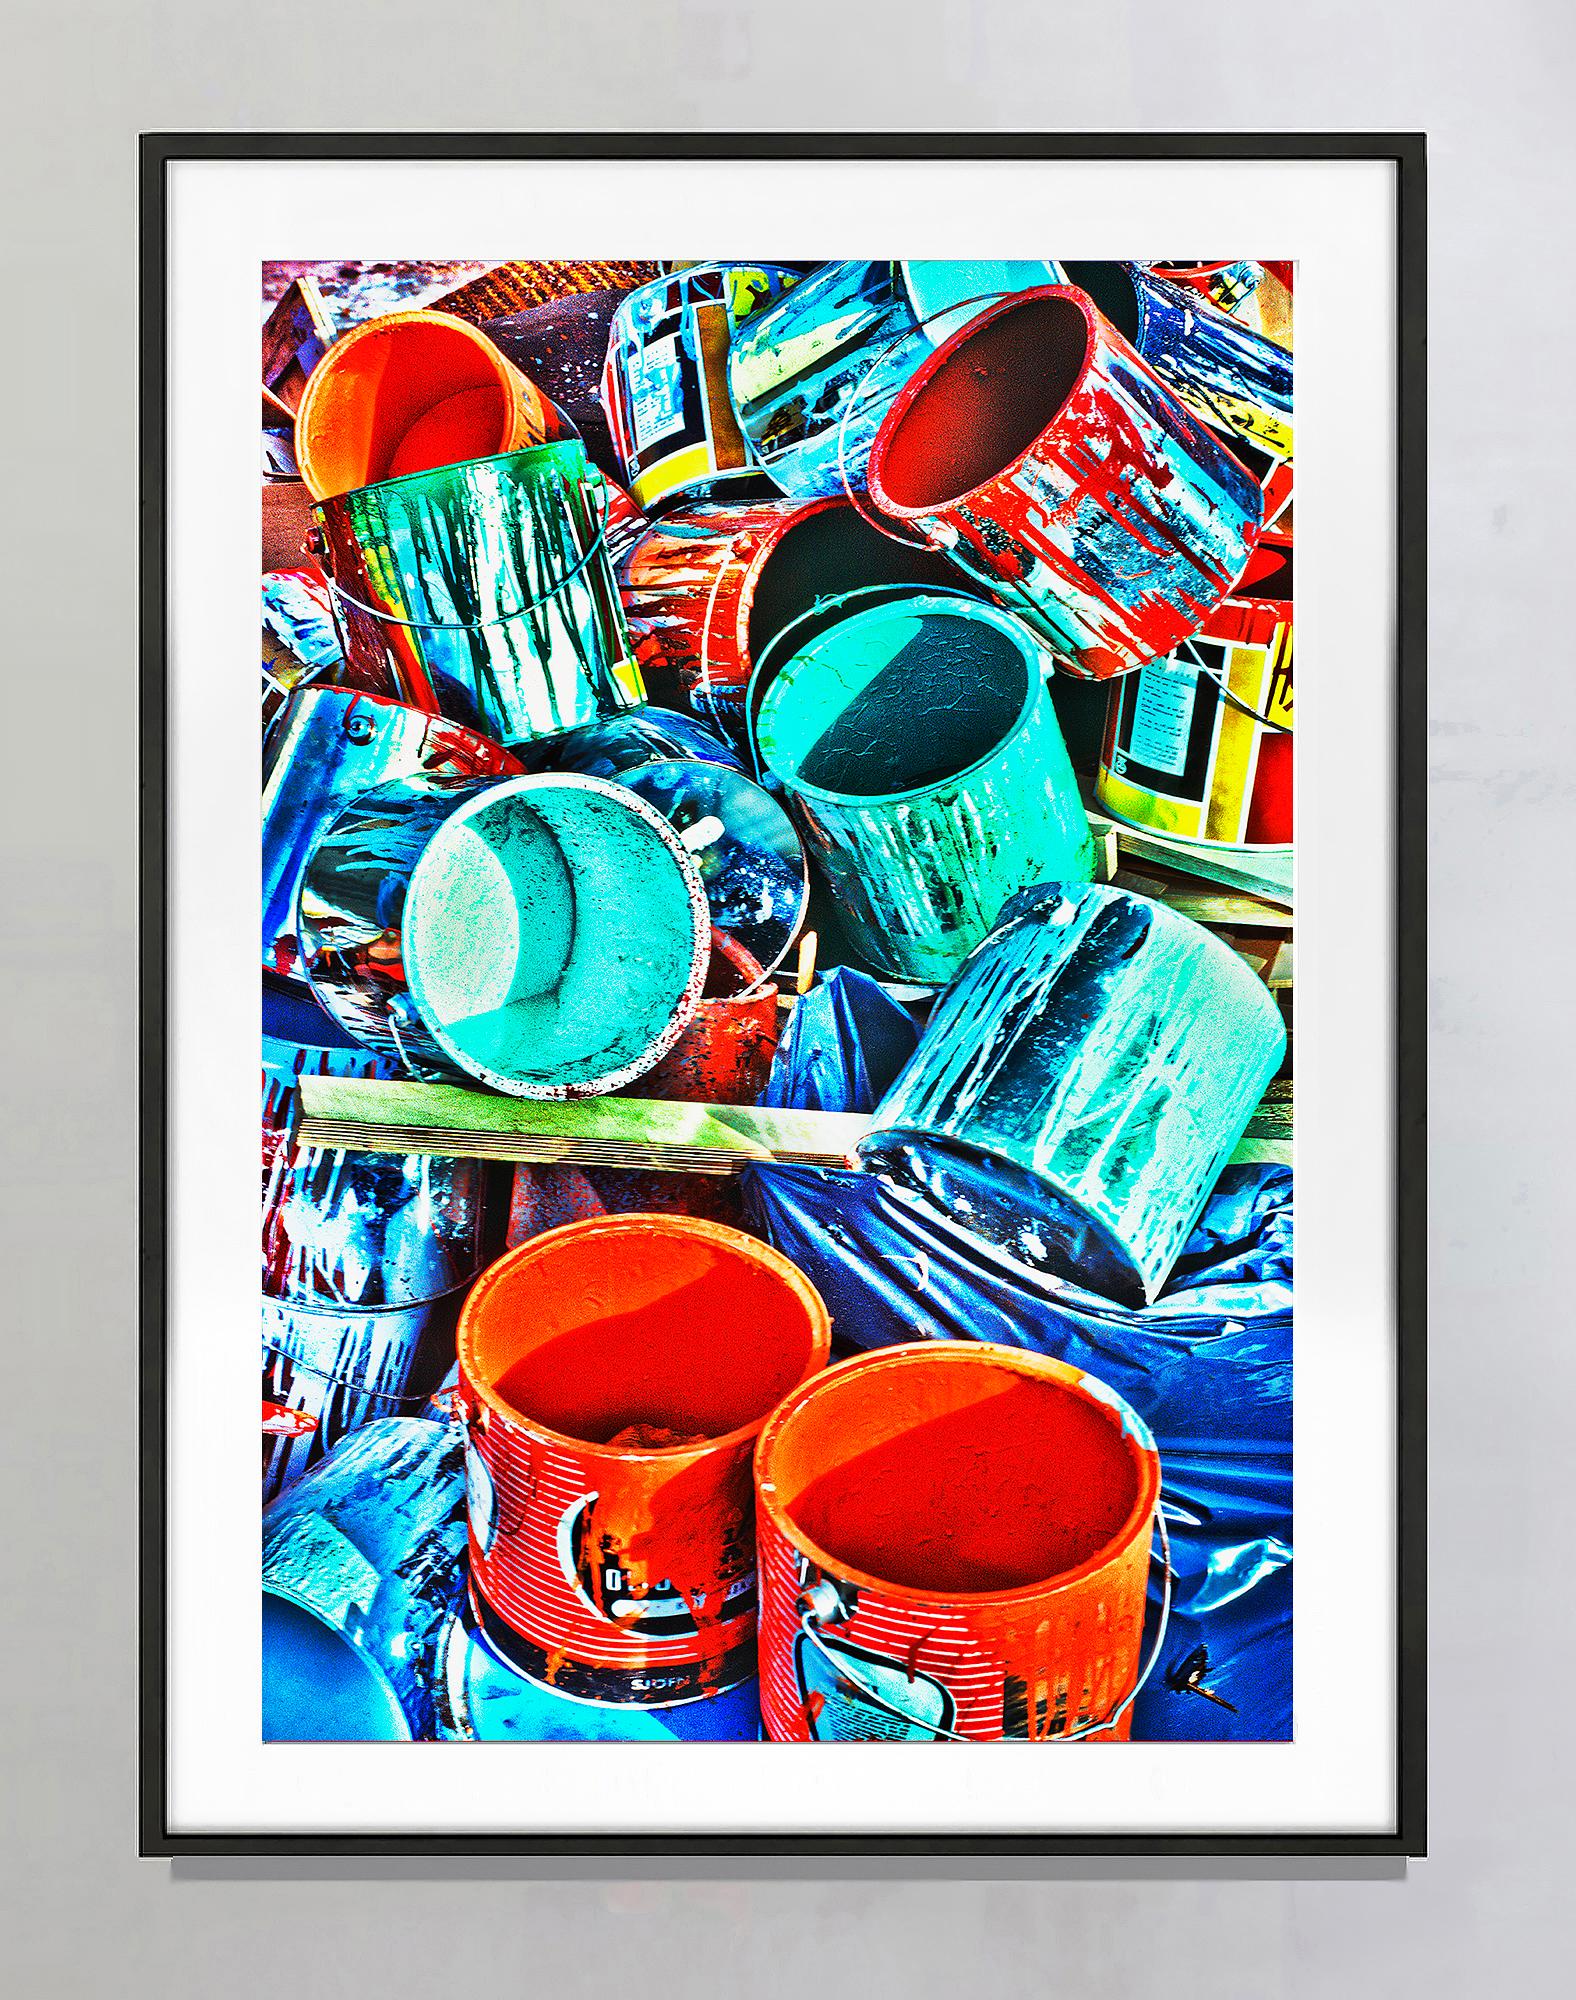 Colorful Paint Cans in Red, Orange, Blue and Turquoise  - Photograph by Mitchell Funk